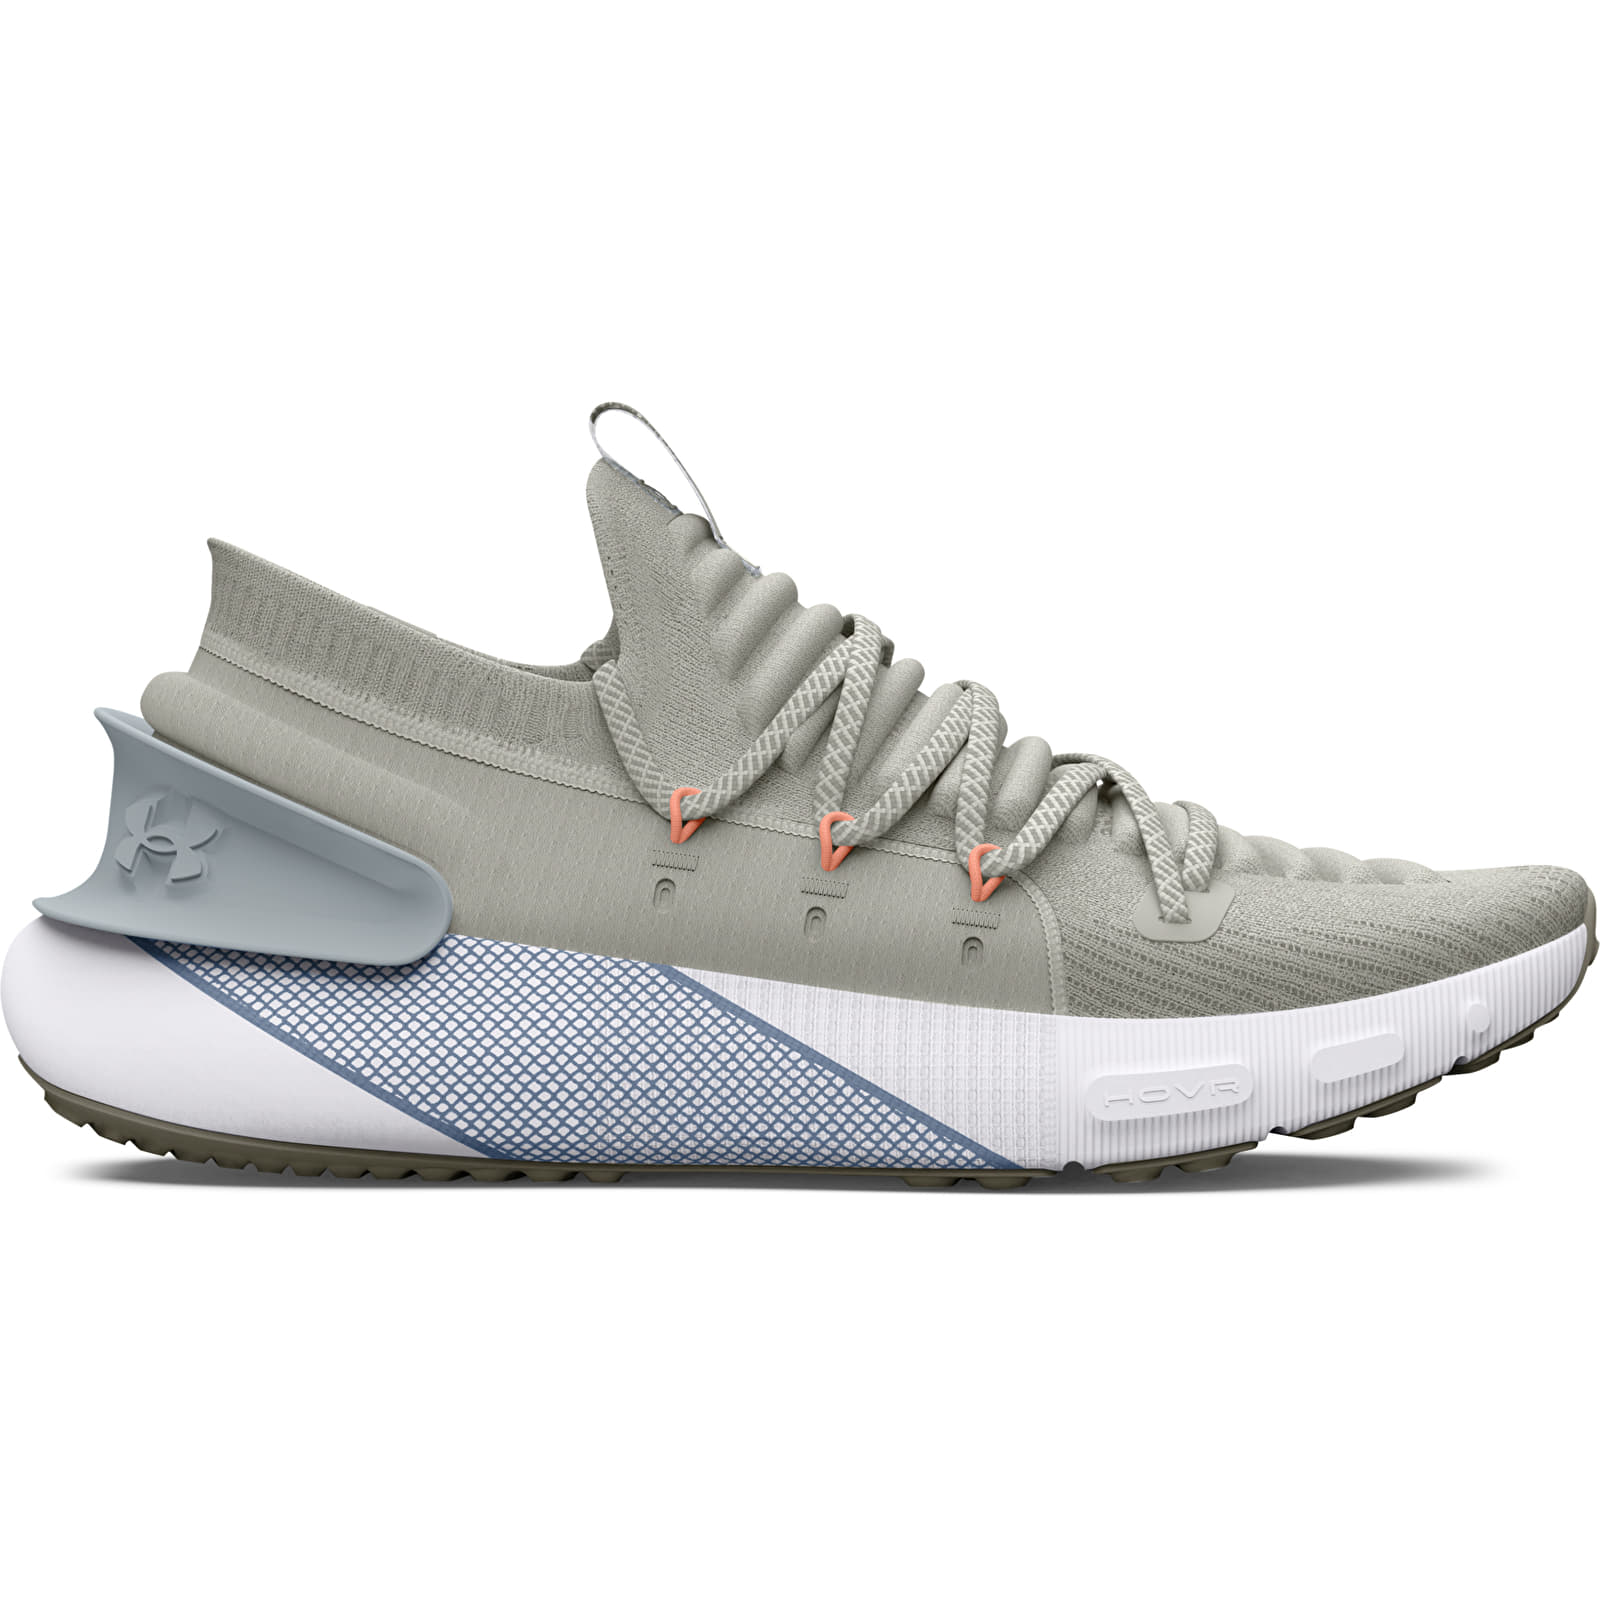 Women's sneakers and shoes Under Armour W HOVR Phantom 3 Olive Tint